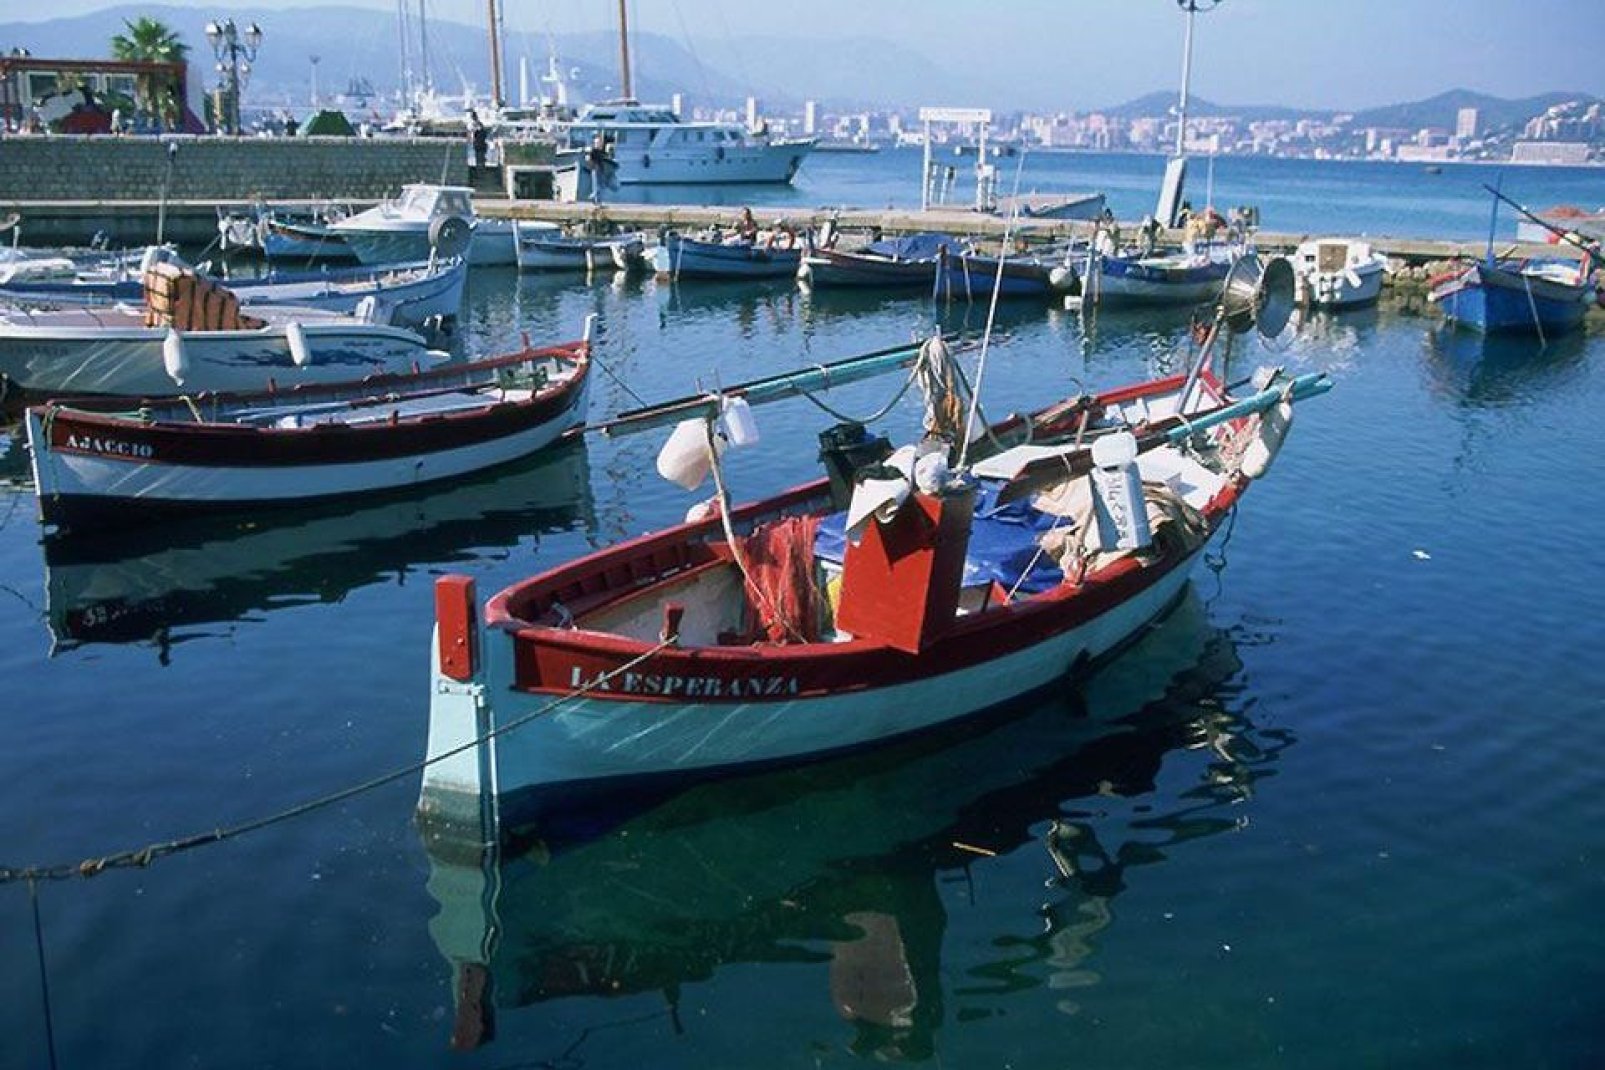 Following underwater archaeological excavations, Roman boats were discovered near Ajaccio.